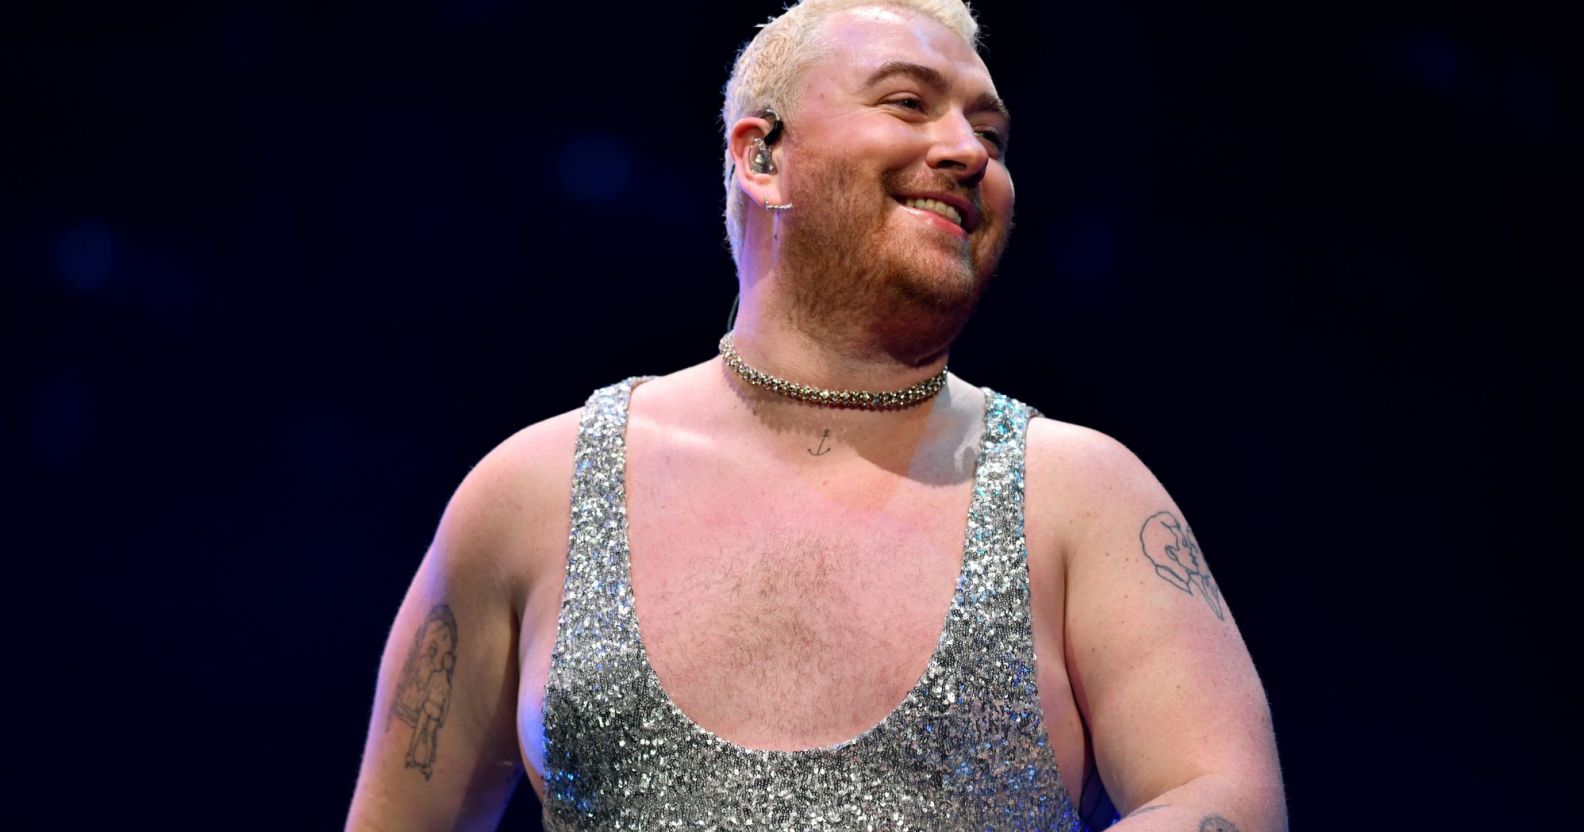 Sam Smith smiling while performing at the 2022 Jingle Bell Ball wearing a silver glittery jumpsuit